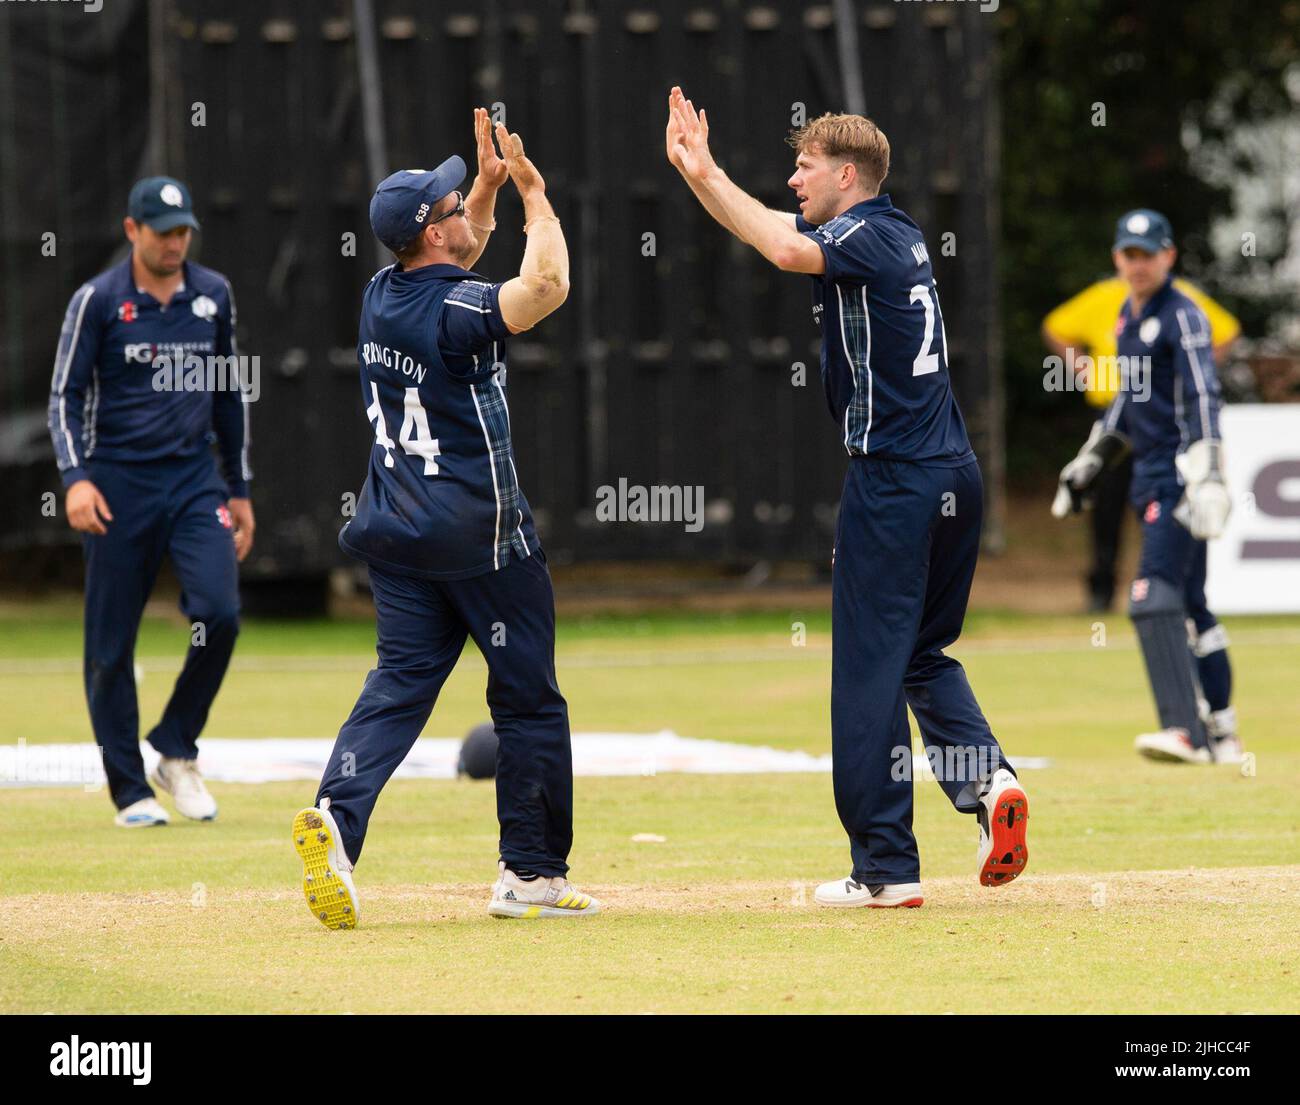 ICC Men's Cricket World Cup League 2 - Scotland v, Nepal. 17th July, 2022. Scotland take on Nepal for the second time in the ICC Div 2 Men's Cricket World Cup League 2 at Titwood, Glasgow. Pic shows: Scotland's Gavin Main is mobbed by teammates after dismissing NepalÕs Karan KC for 7 runs. Credit: Ian Jacobs/Alamy Live News Stock Photo